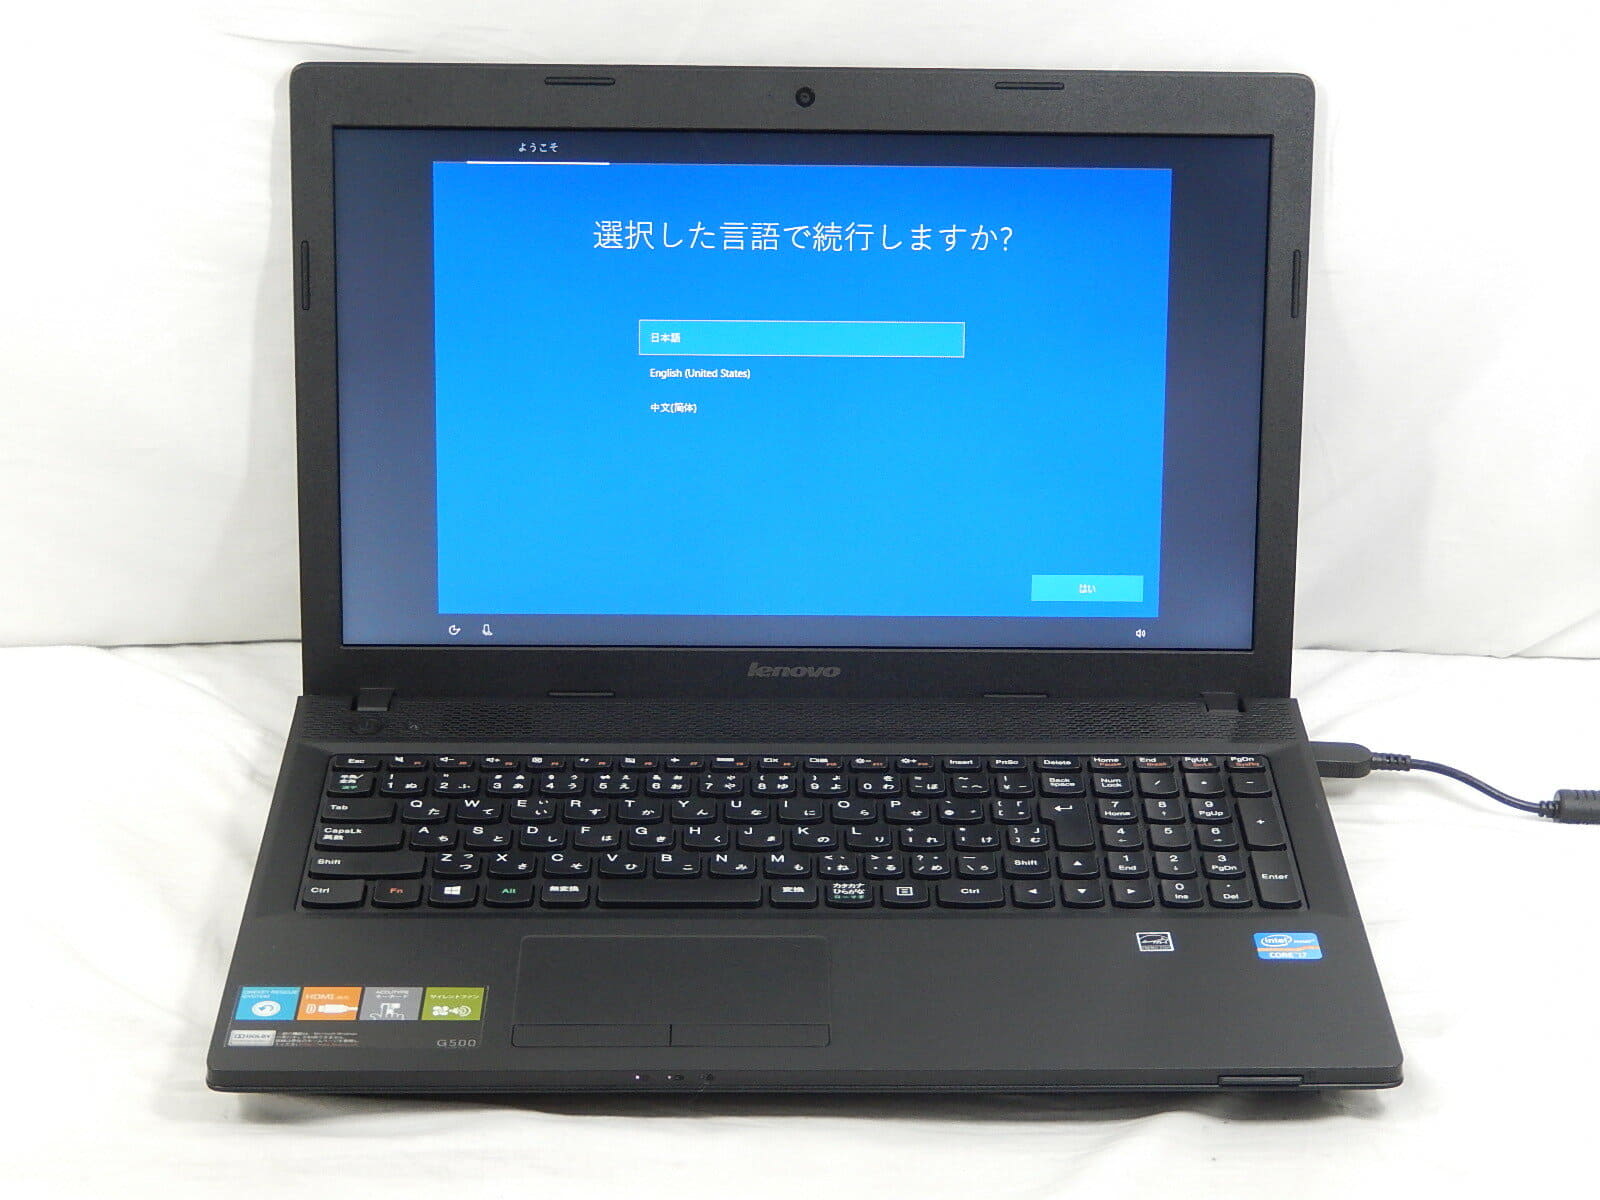 Used]Lenovo G500 20236 Corei7 3632QM 2.2GHz memory 4GB HDD500GB S multi-15  inches Win10Home E TG - BE FORWARD Store